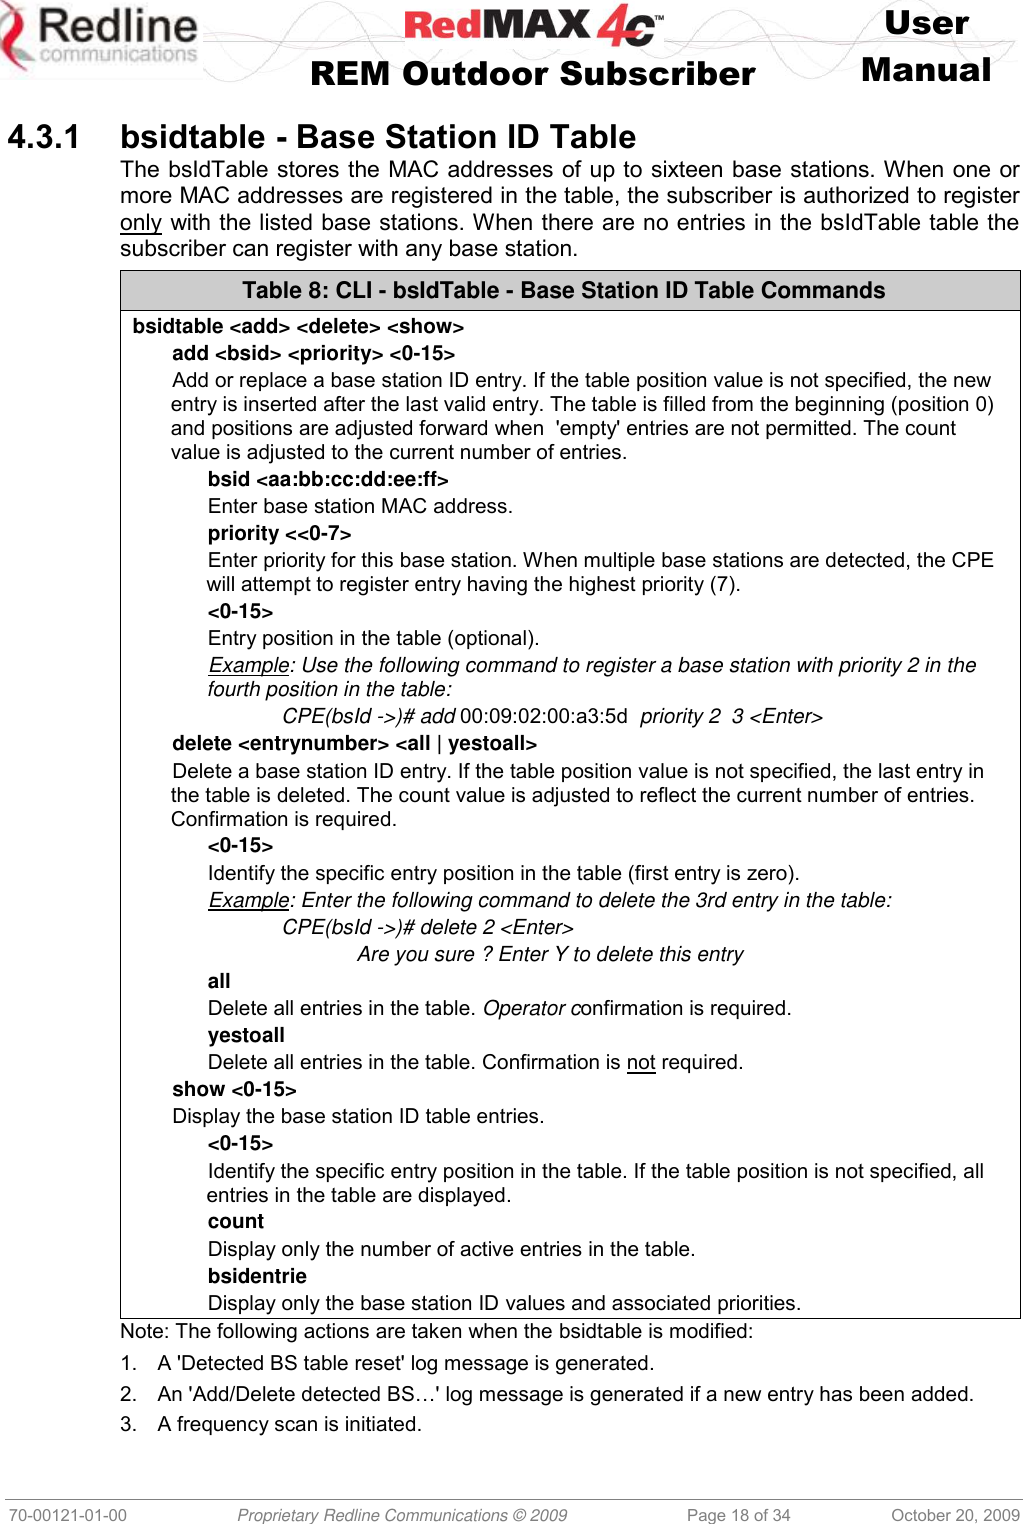    User   REM Outdoor Subscriber  Manual   70-00121-01-00 Proprietary Redline Communications © 2009 Page 18 of 34 October 20, 2009  4.3.1 bsidtable - Base Station ID Table The bsIdTable stores the MAC addresses of up to sixteen base stations. When one or more MAC addresses are registered in the table, the subscriber is authorized to register only with the listed base stations. When there are no entries in the bsIdTable table the subscriber can register with any base station.  Table 8: CLI - bsIdTable - Base Station ID Table Commands bsidtable &lt;add&gt; &lt;delete&gt; &lt;show&gt; add &lt;bsid&gt; &lt;priority&gt; &lt;0-15&gt; Add or replace a base station ID entry. If the table position value is not specified, the new entry is inserted after the last valid entry. The table is filled from the beginning (position 0) and positions are adjusted forward when  &apos;empty&apos; entries are not permitted. The count value is adjusted to the current number of entries. bsid &lt;aa:bb:cc:dd:ee:ff&gt; Enter base station MAC address. priority &lt;&lt;0-7&gt; Enter priority for this base station. When multiple base stations are detected, the CPE will attempt to register entry having the highest priority (7). &lt;0-15&gt; Entry position in the table (optional). Example: Use the following command to register a base station with priority 2 in the fourth position in the table:   CPE(bsId -&gt;)# add 00:09:02:00:a3:5d  priority 2  3 &lt;Enter&gt; delete &lt;entrynumber&gt; &lt;all | yestoall&gt;  Delete a base station ID entry. If the table position value is not specified, the last entry in the table is deleted. The count value is adjusted to reflect the current number of entries. Confirmation is required. &lt;0-15&gt; Identify the specific entry position in the table (first entry is zero).  Example: Enter the following command to delete the 3rd entry in the table:   CPE(bsId -&gt;)# delete 2 &lt;Enter&gt;     Are you sure ? Enter Y to delete this entry all Delete all entries in the table. Operator confirmation is required. yestoall Delete all entries in the table. Confirmation is not required. show &lt;0-15&gt; Display the base station ID table entries.  &lt;0-15&gt; Identify the specific entry position in the table. If the table position is not specified, all entries in the table are displayed. count Display only the number of active entries in the table. bsidentrie Display only the base station ID values and associated priorities. Note: The following actions are taken when the bsidtable is modified: 1.  A &apos;Detected BS table reset&apos; log message is generated.  2. An &apos;Add/Delete detected BS…&apos; log message is generated if a new entry has been added. 3.  A frequency scan is initiated. 